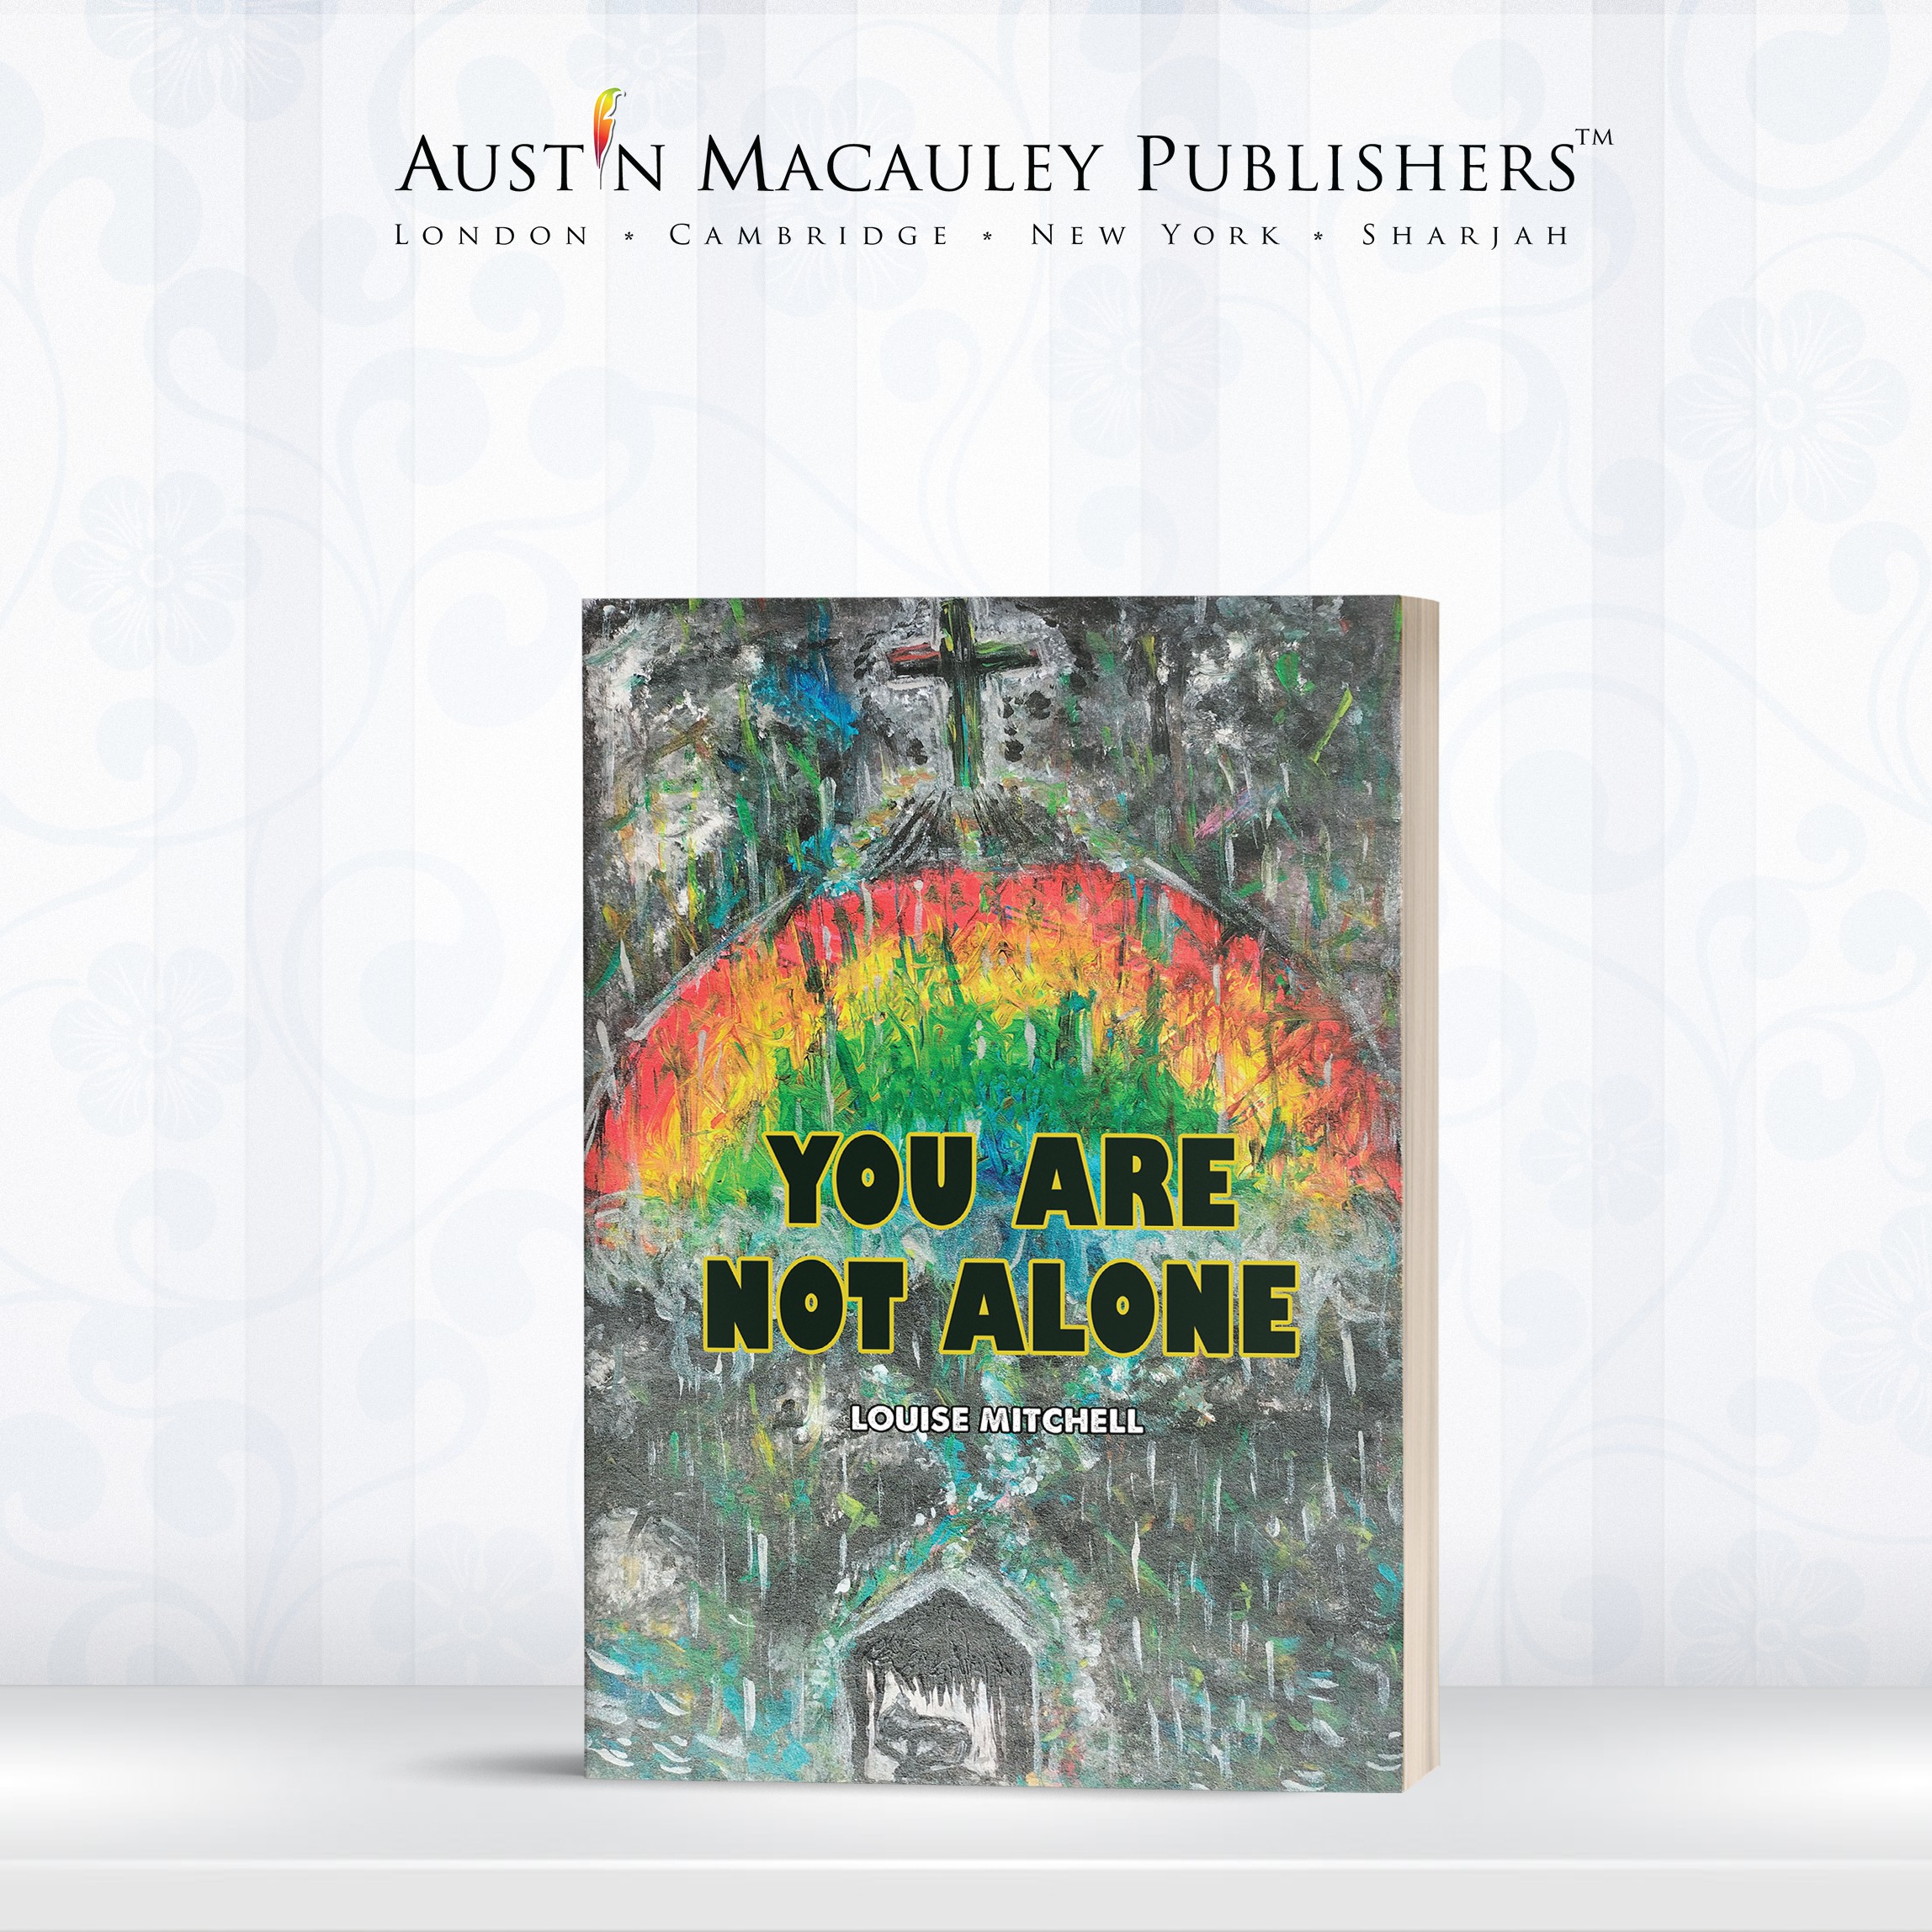 Book Launch of a beautiful poetry book, You Are Not Alone, by Louise Mitchell